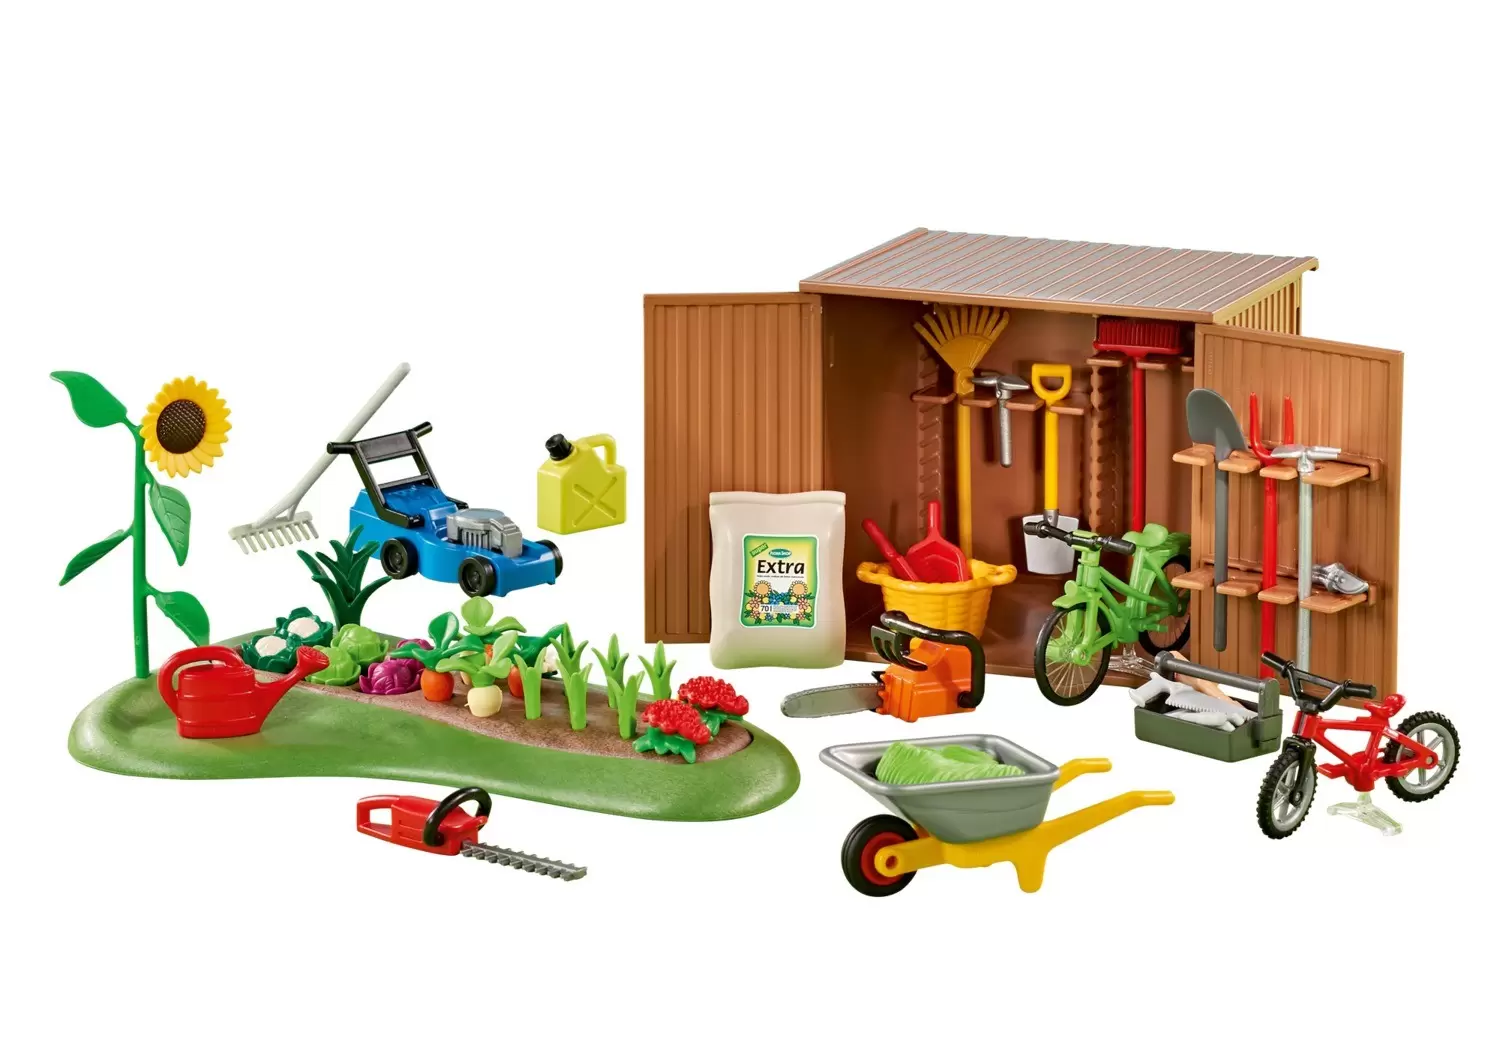 Playmobil Houses and Furniture - Tool shed with small vegetable garden